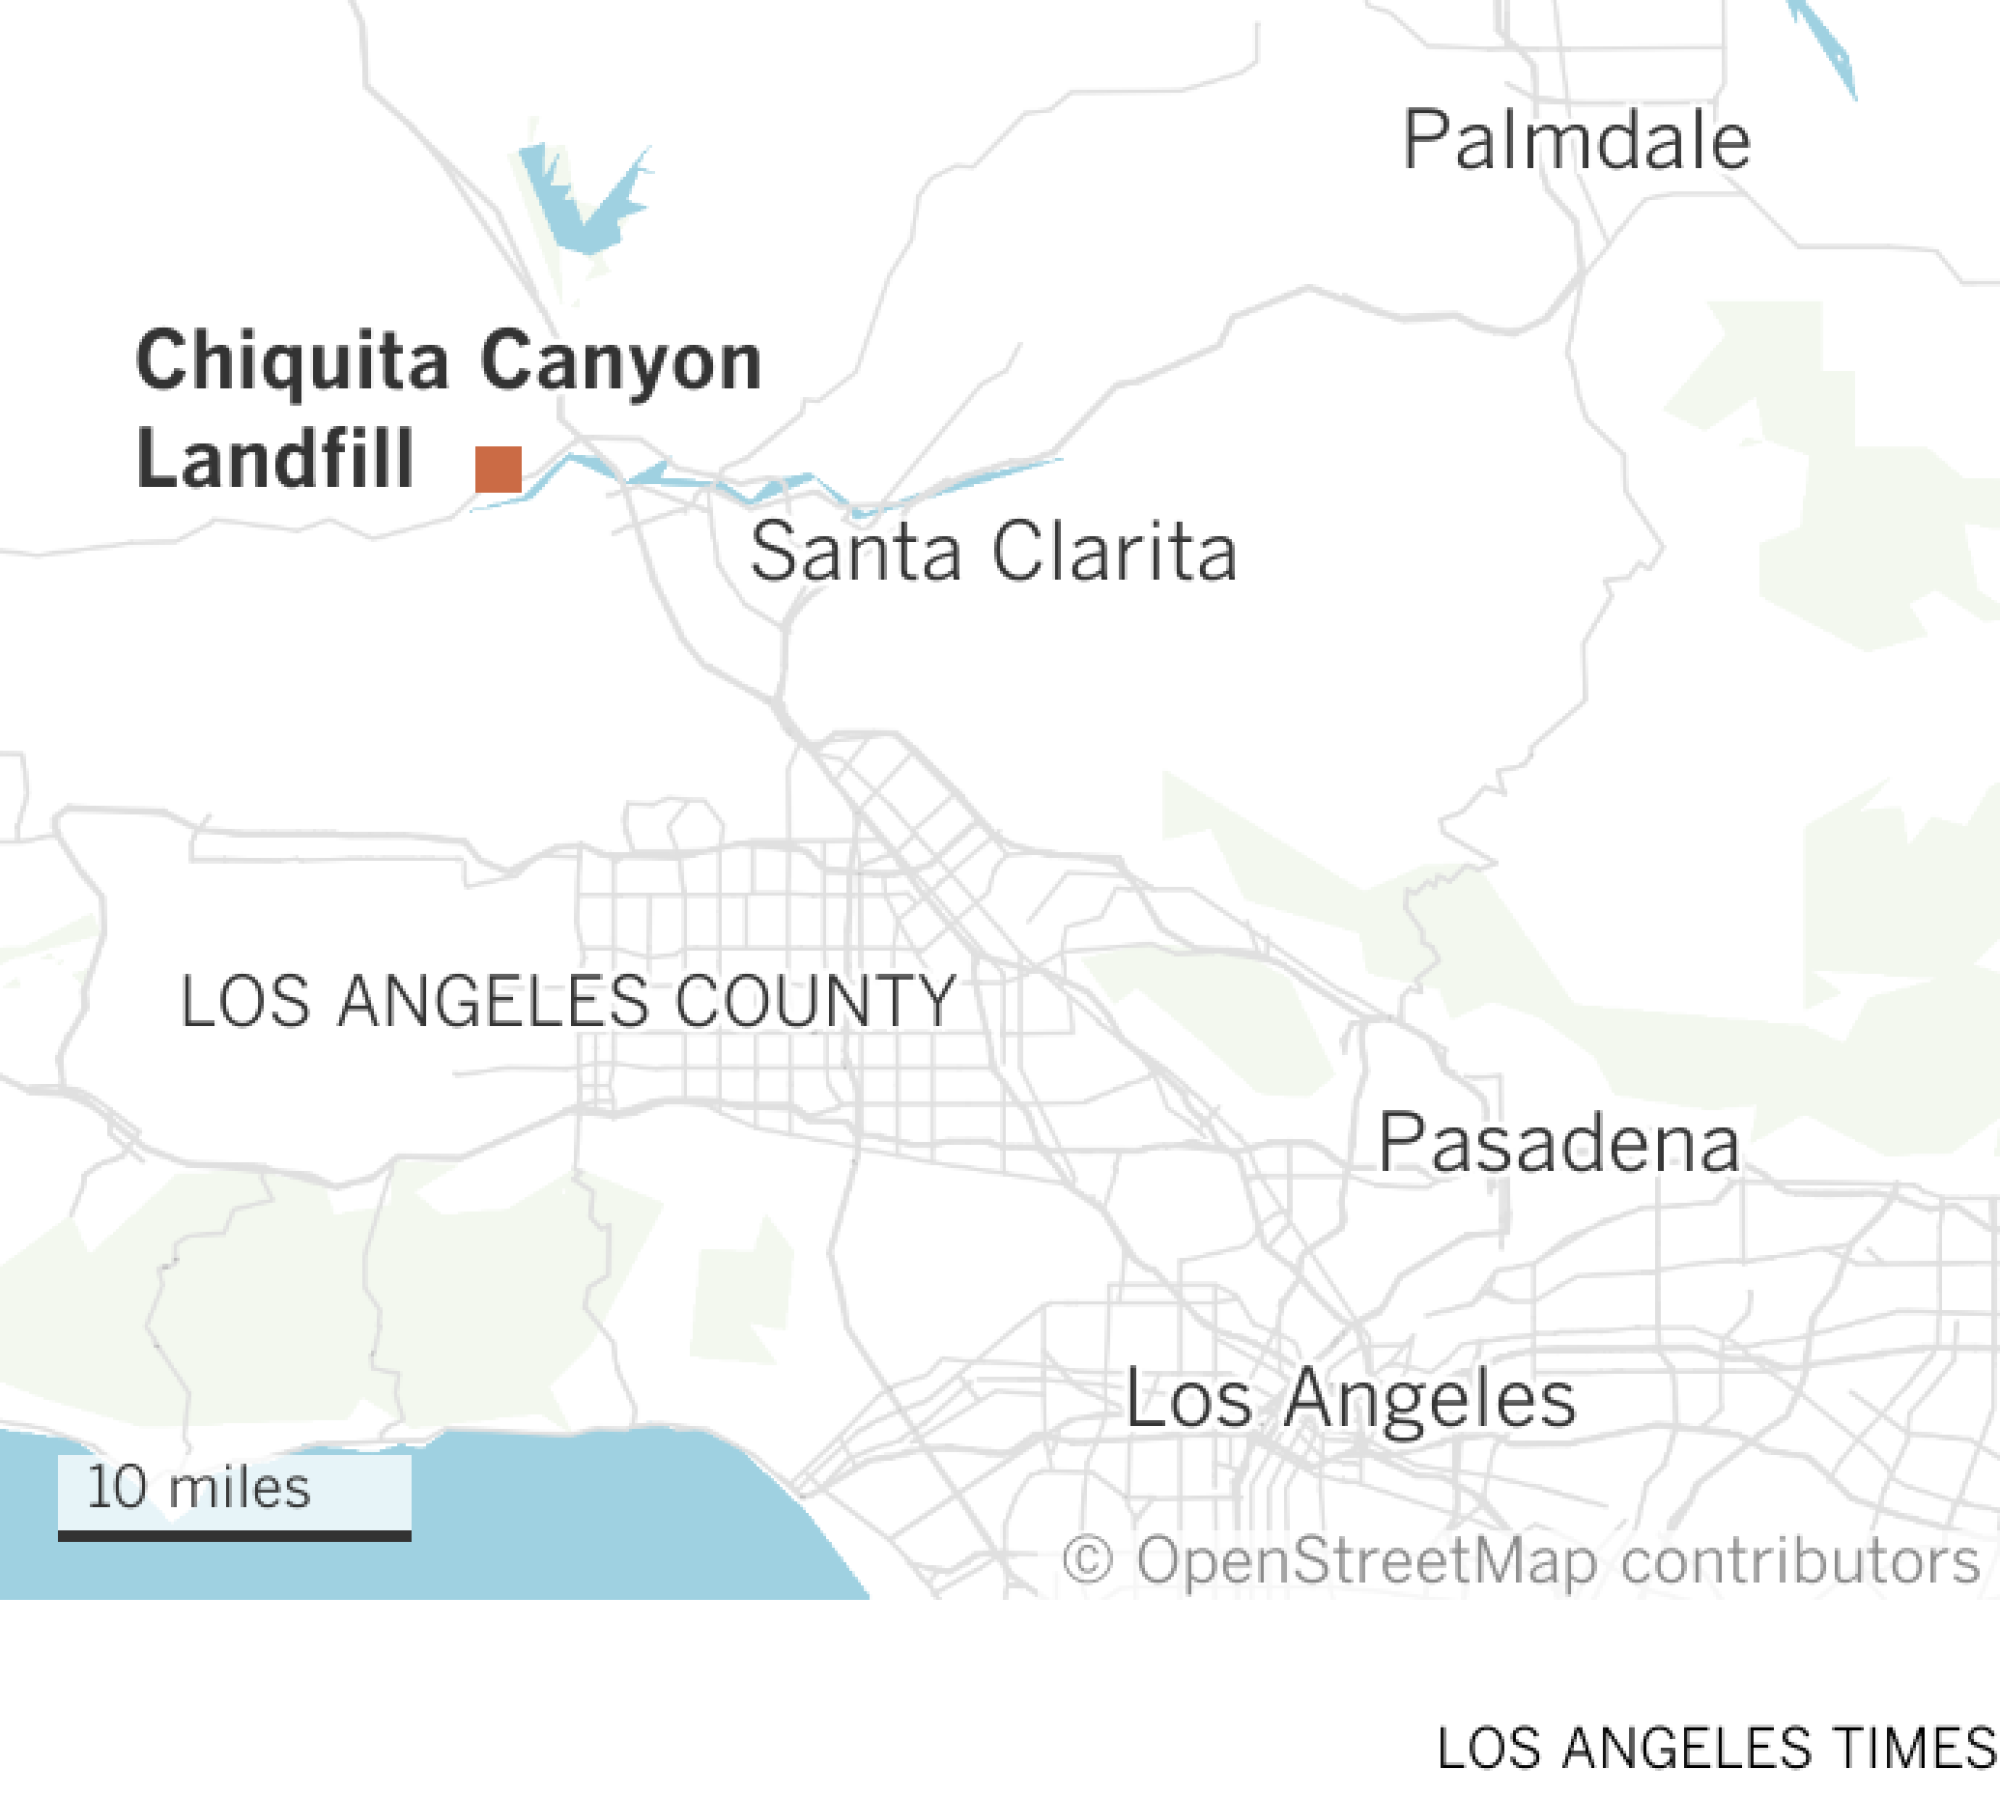 Map shows the location of Chiquita Canyon Landfill near Castaic